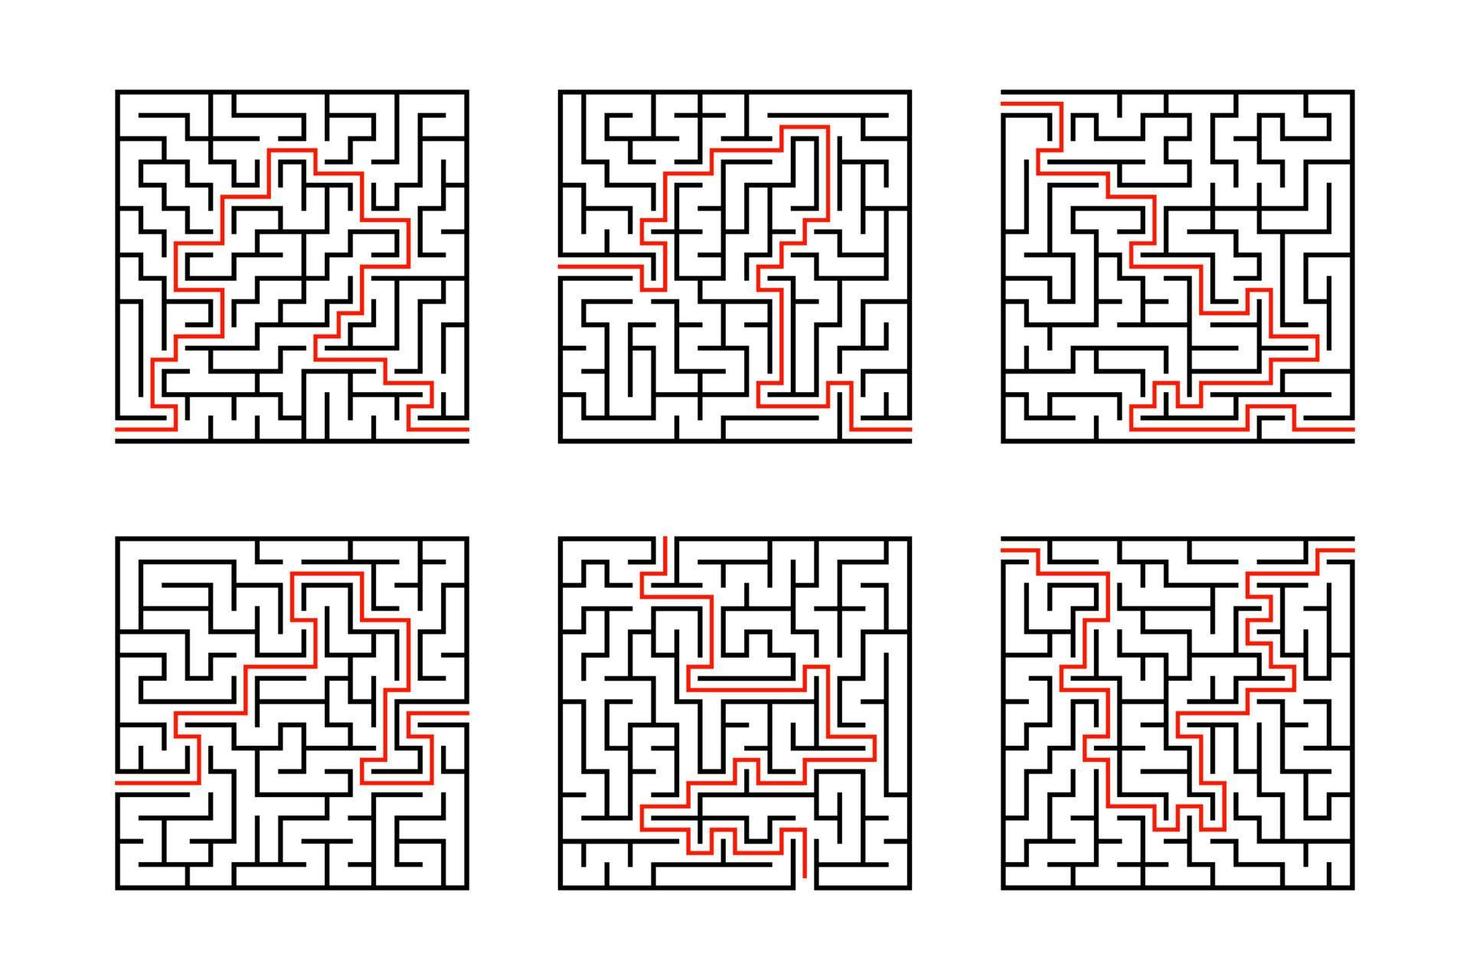 A set of square mazes. Game for kids. Puzzle for children. Labyrinth conundrum. Flat vector illustration isolated on white background. With answer.